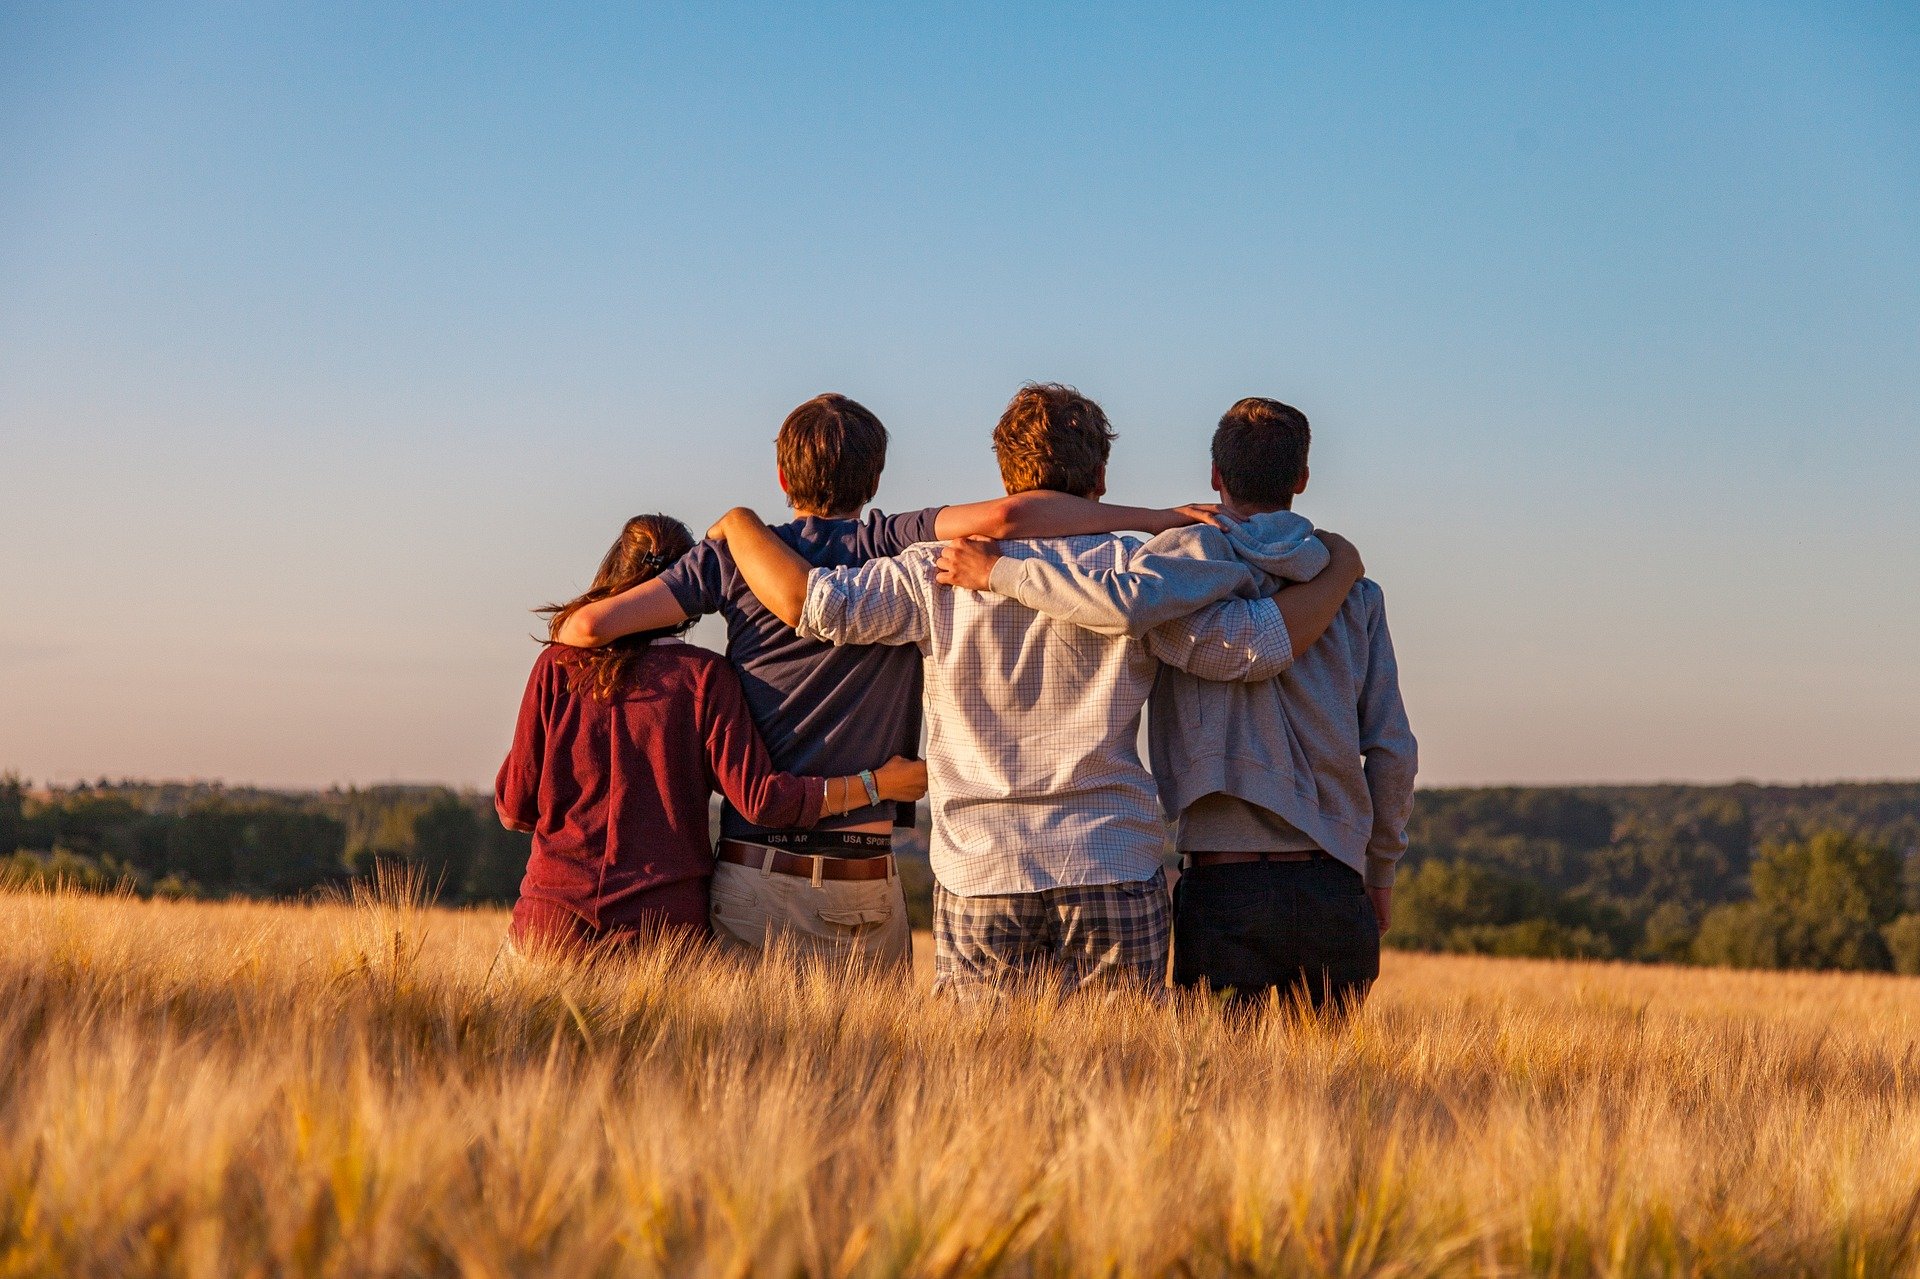 group of young people with arms around each other